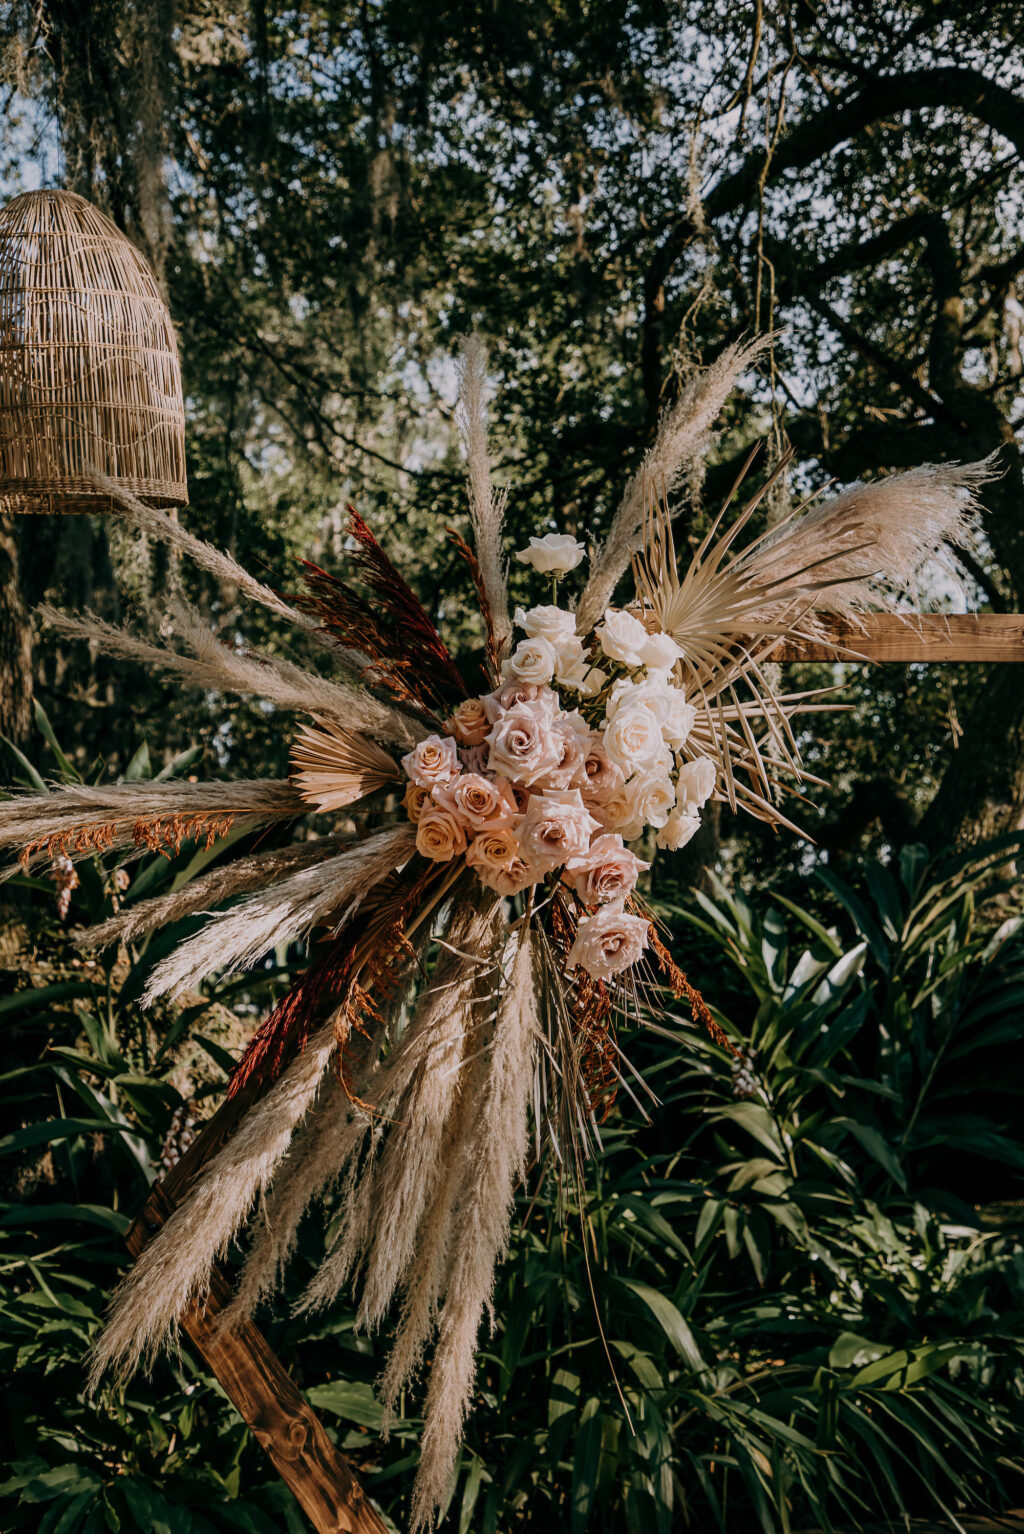 Boho Vintage Wedding Ceremony Decor, Neutral Pampas Grass, Blush Pink and White Roses, Dried Palm Leaves, Terracotta Flower Arrangement on Geometric Hexagon Wooden Arch | Tampa Bay Wedding Planner Stephany Perry Events